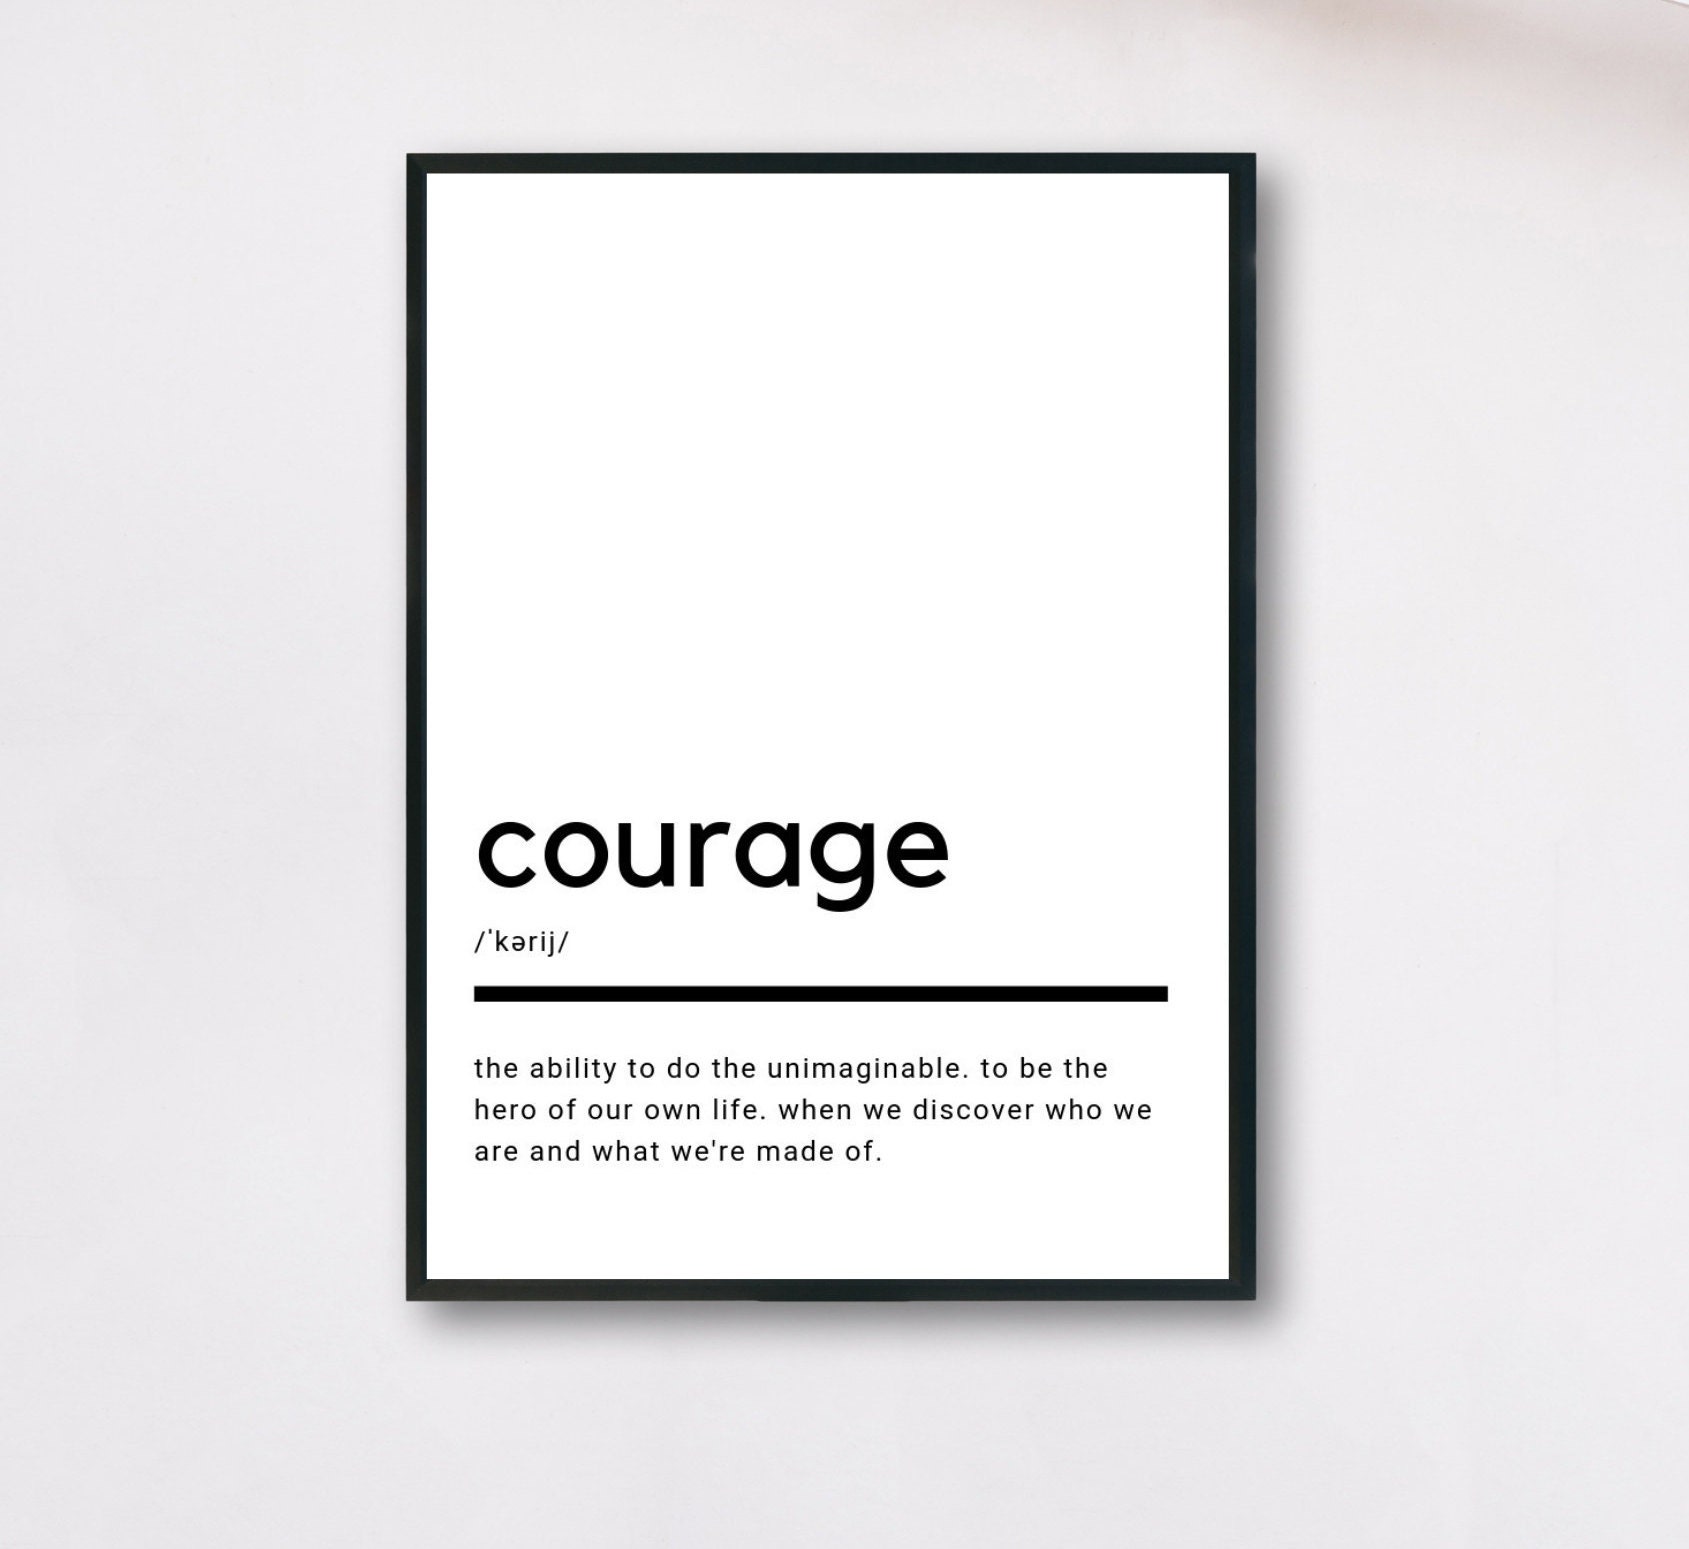 Courage Definition, Printable Wall Art, Courage Poster, Courage Quote,  Courage Printable, Courage Gift, Courage Wall Art, Wall Decor -  Norway